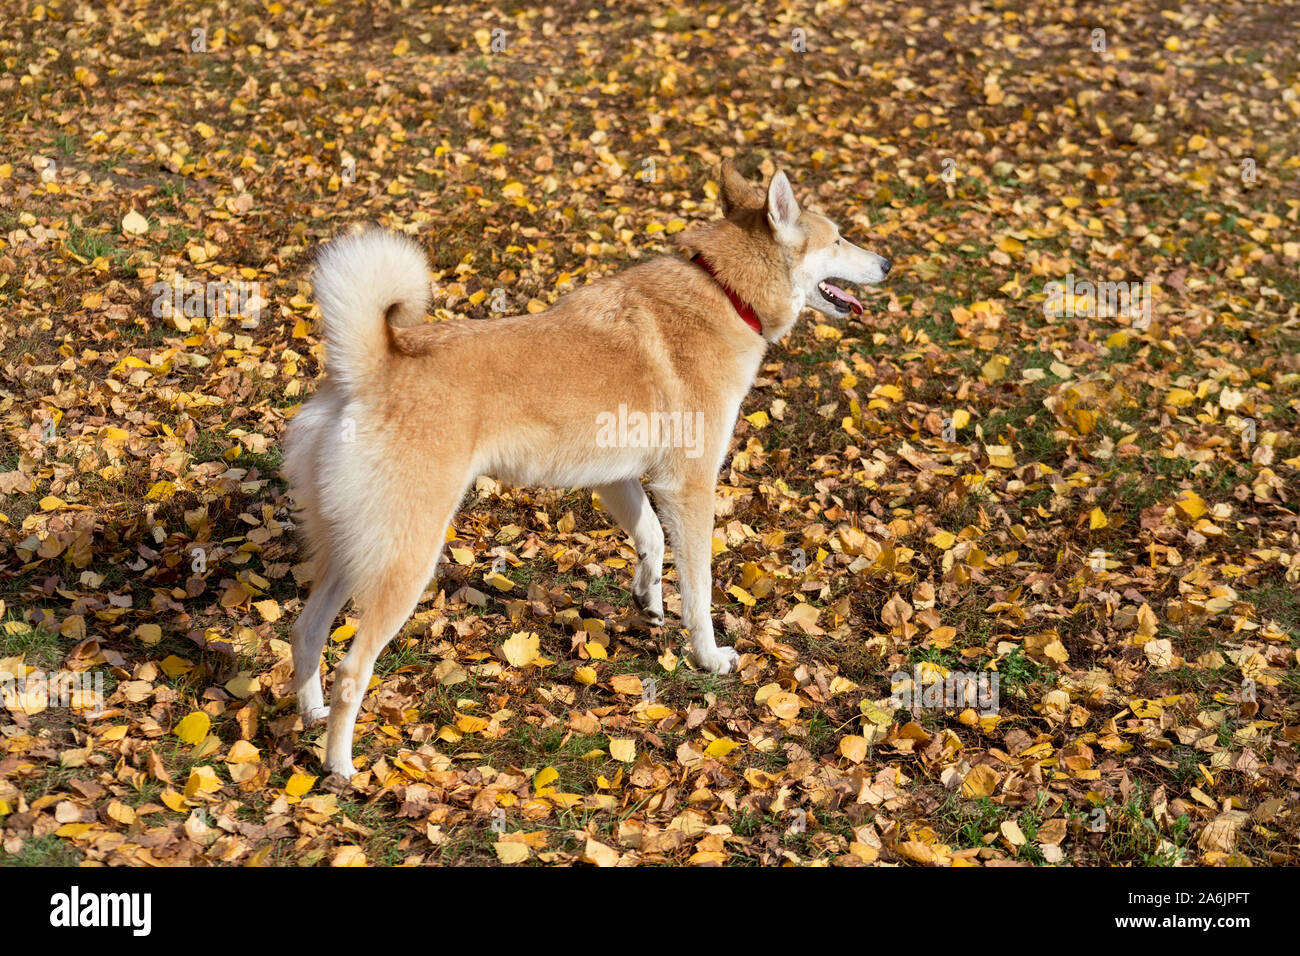 West Siberian Laika Is Standing On Yellow Leaves In The Autumn Park Pet Animals Purebred Dog Stock Photo Alamy